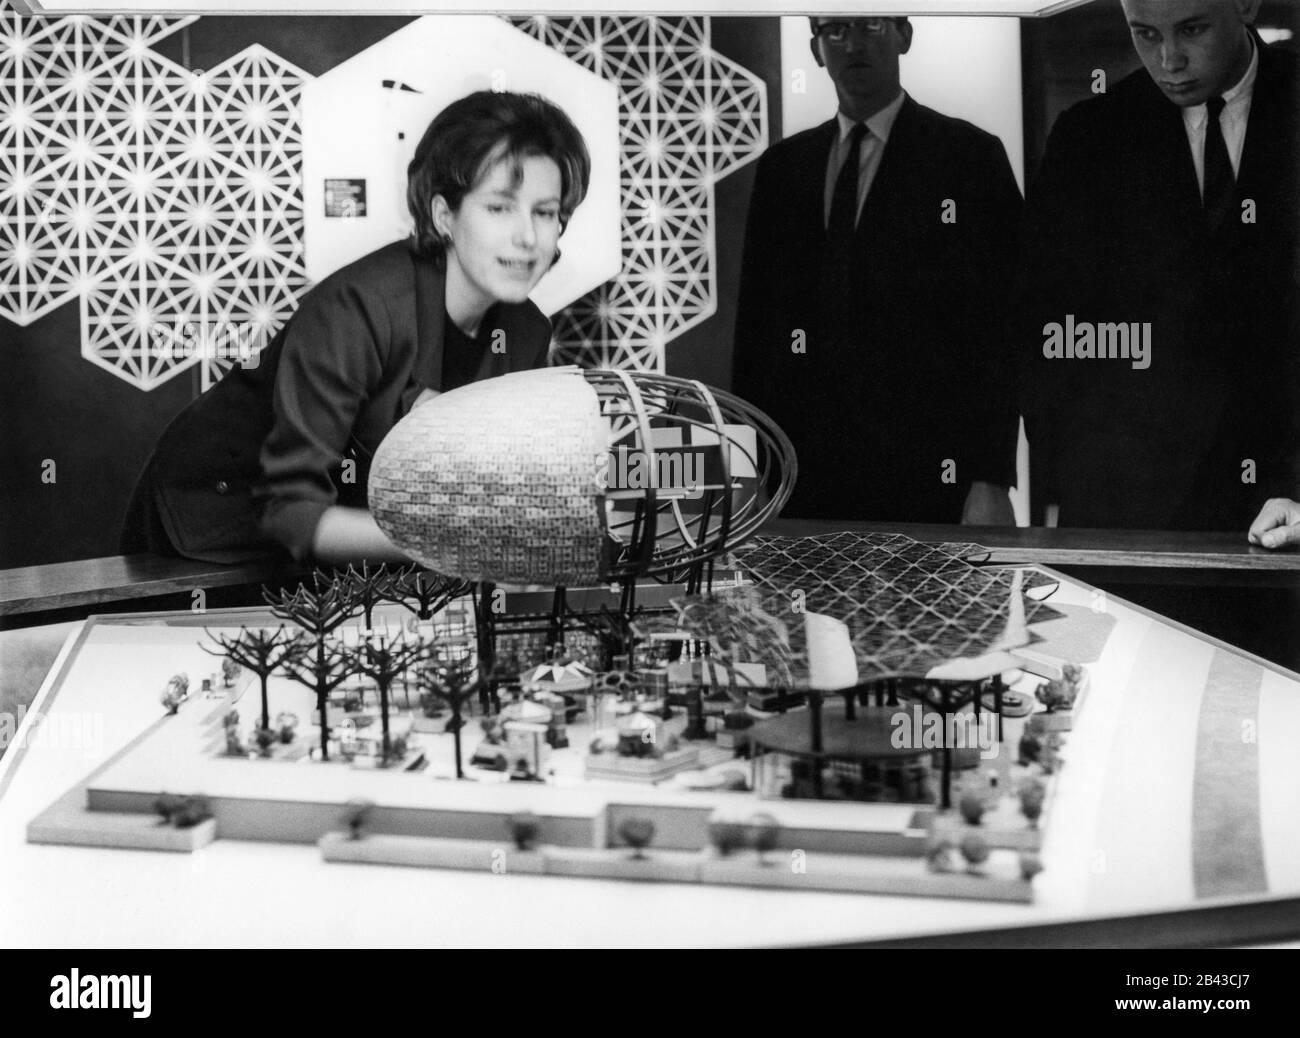 People viewing an architectural design model of the IBM pavilion with man-made steel trees and Ovoid Theater, designed by Charles Eames and Eero Saarinen for the 1964 New York World's Fair. The pavilion model was likely on display at the IBM Business Show in Manhattan at the New York Coliseum, circa April 30,1963. Stock Photo